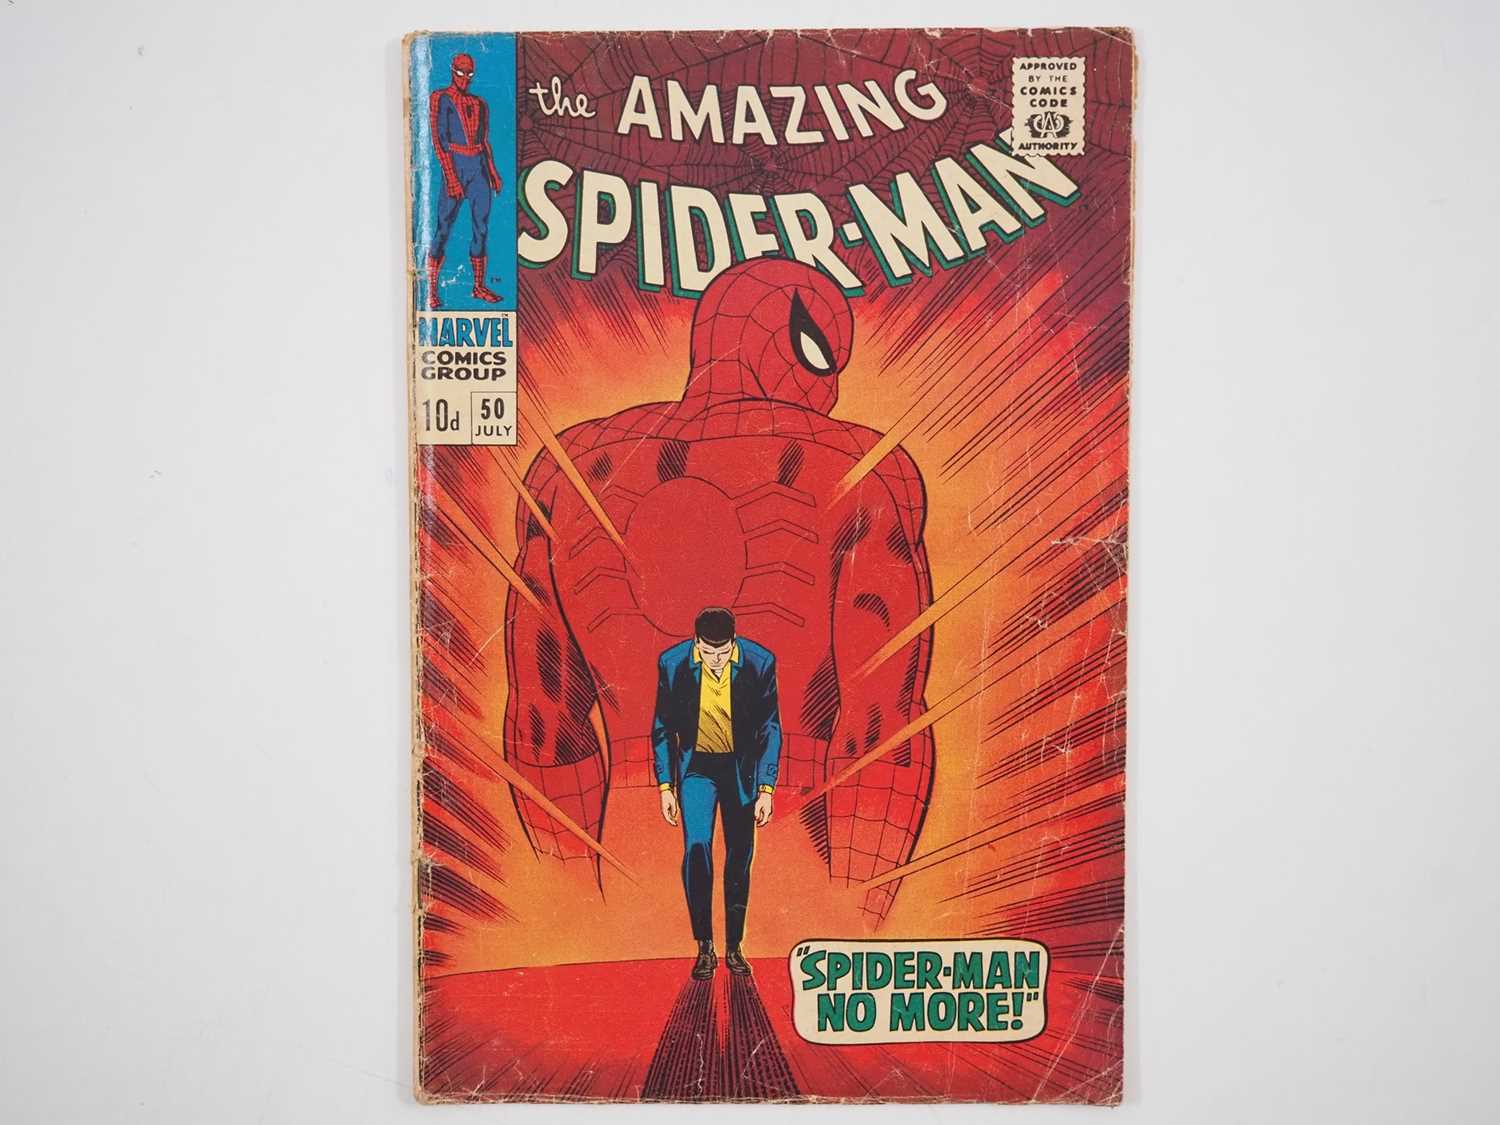 AMAZING SPIDER-MAN #50 & 51 (2 in Lot) - (1967 - MARVEL - UK Price Variant) - RED HOT KEY Book & - Image 3 of 22